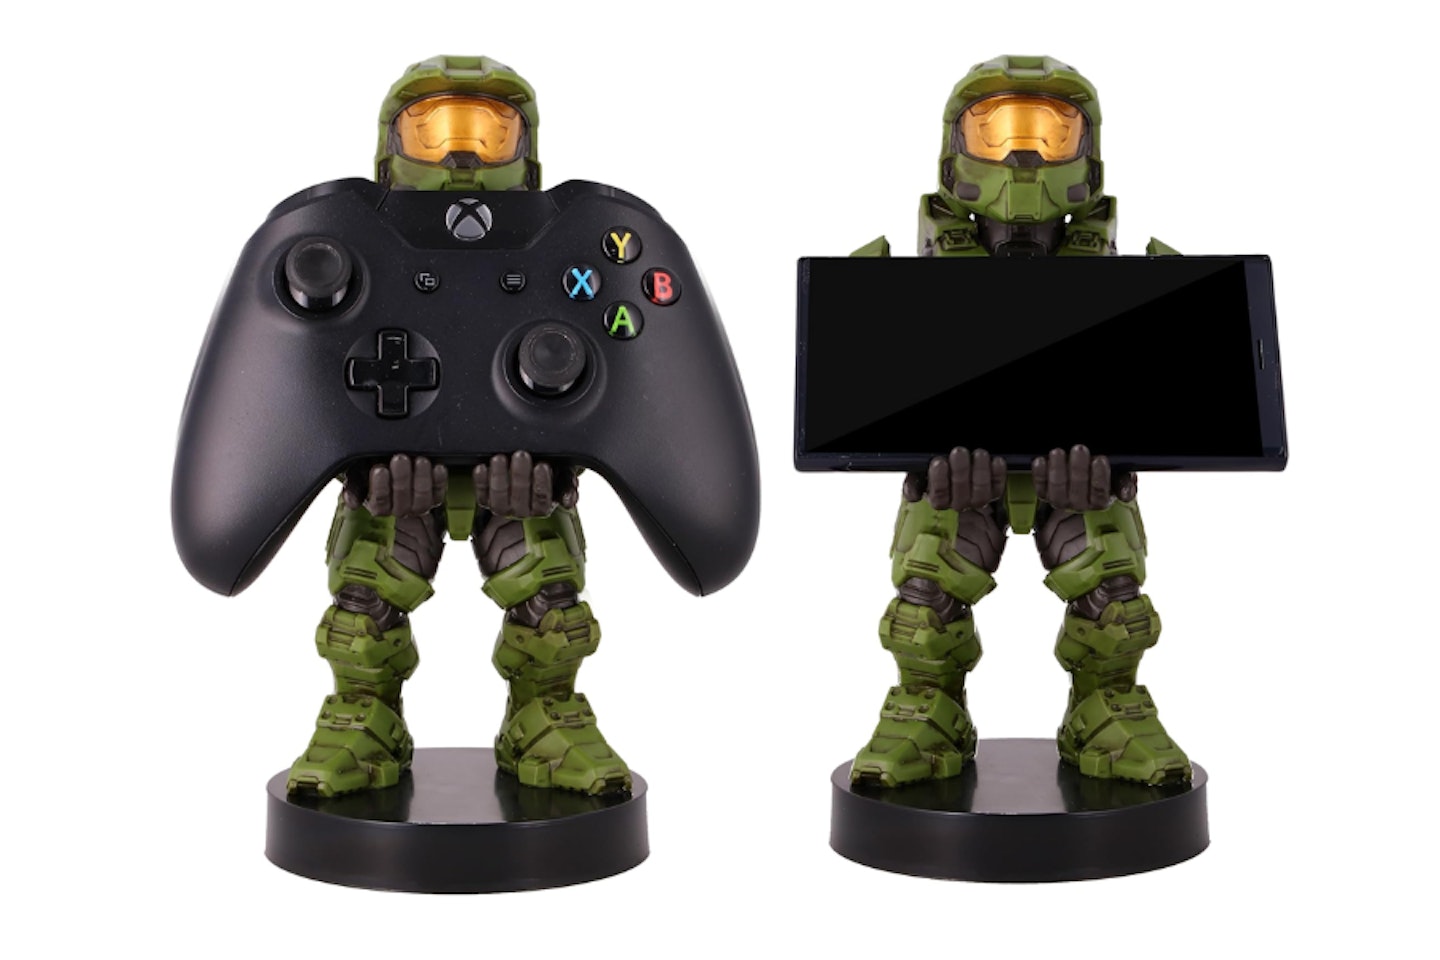 Cable Guys - Halo Figures Master Chief Infinite Gaming Accessories Holder & Phone Holder  - one of the best PC gaming accessories